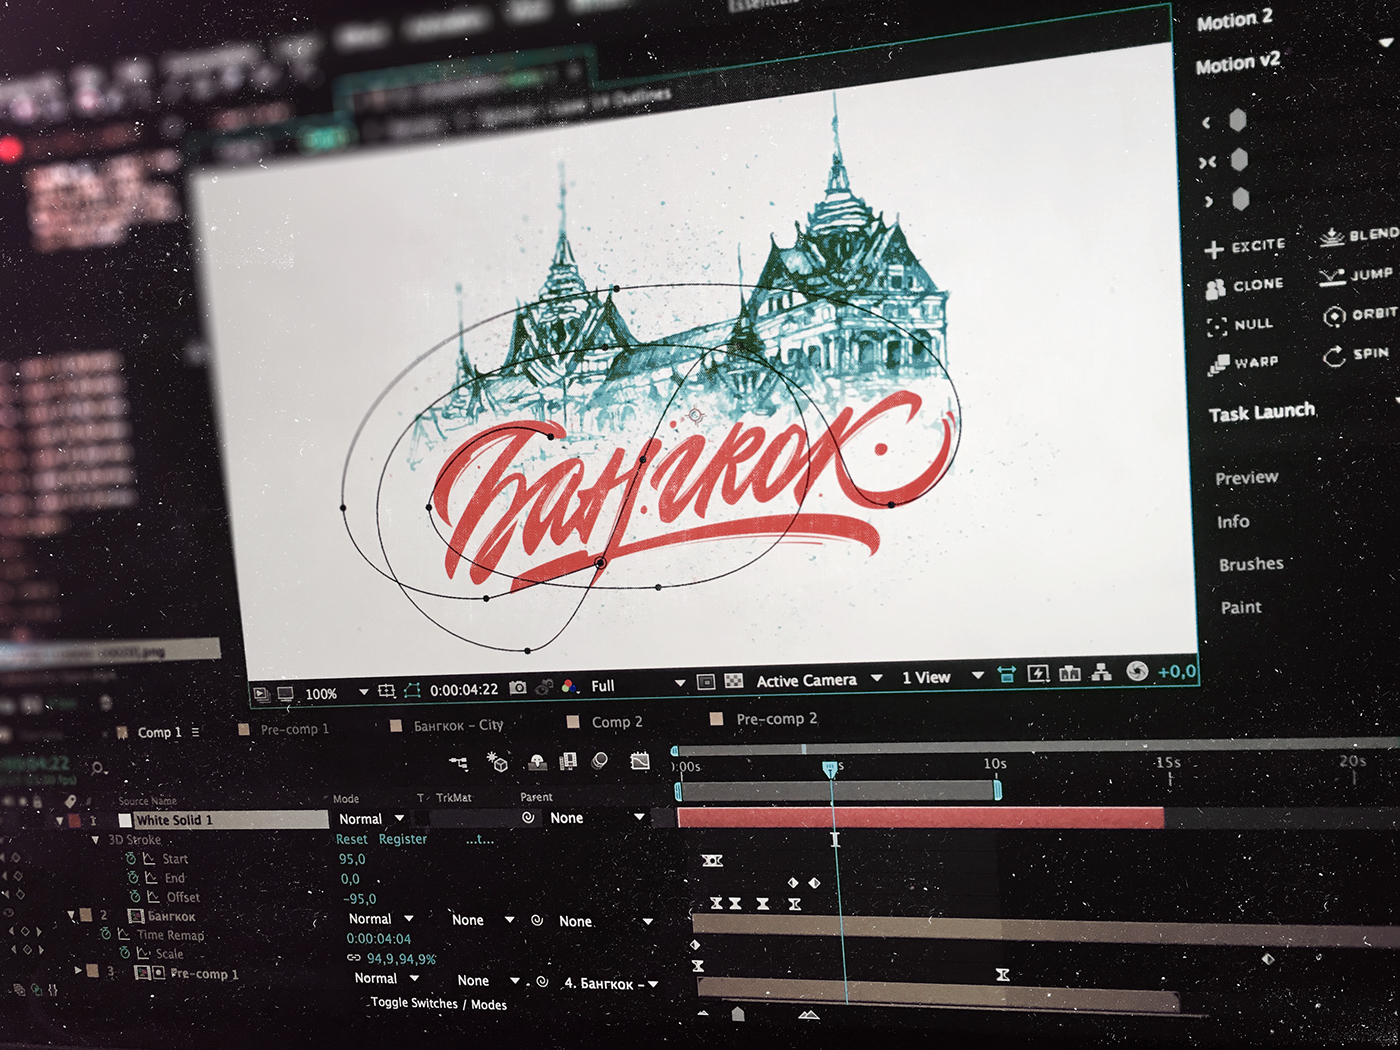 lettering Calligraphy   typography   ILLUSTRATION  animation  motion design watercolor